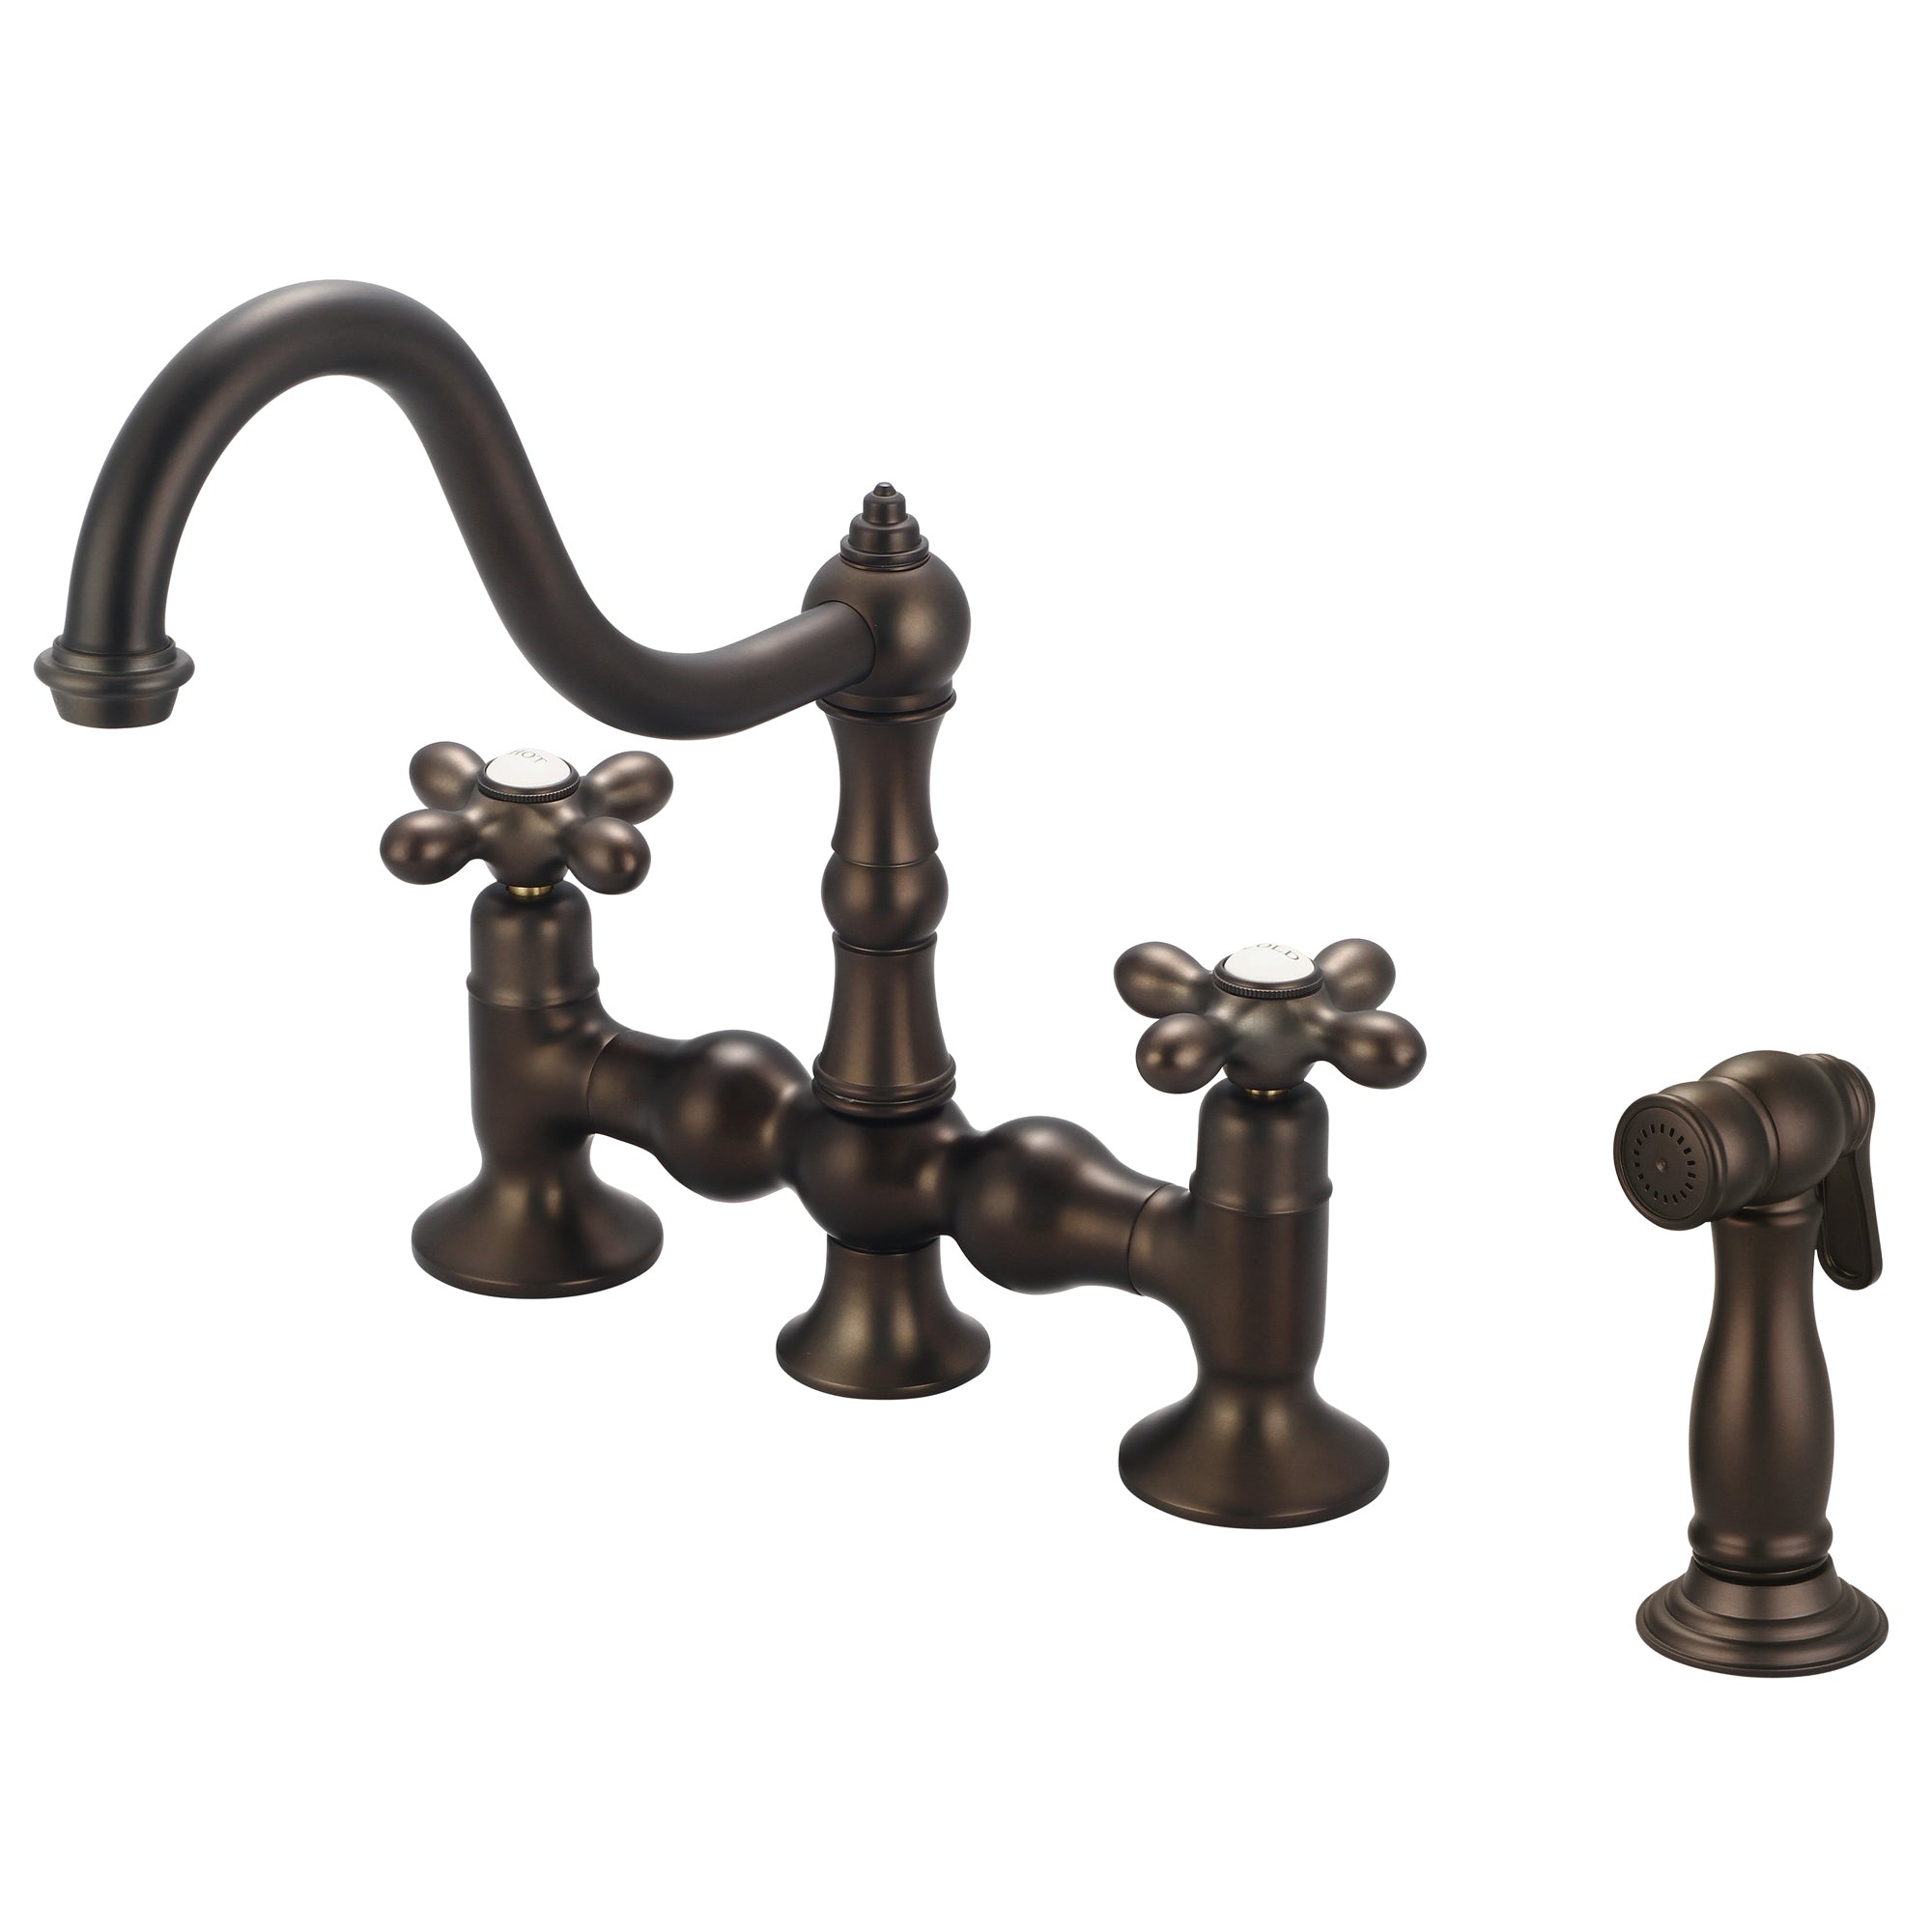 Water Creation | Bridge Style Kitchen Faucet With Side Spray To Match in Oil-rubbed Bronze Finish Finish With Metal Lever Handles, Hot And Cold Labels Included | F5-0010-03-AX